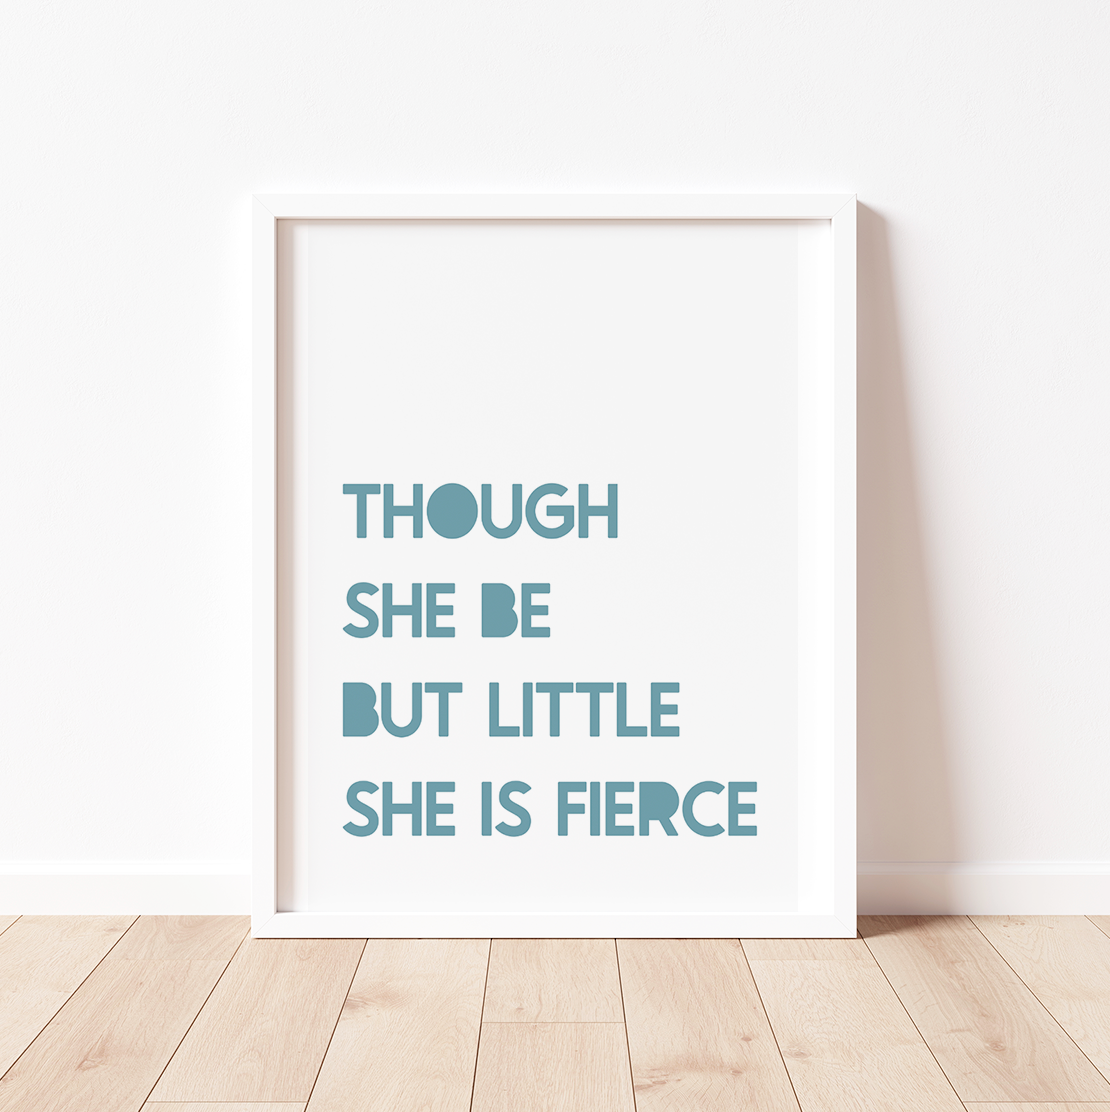 THOUGH SHE BE BUT LITTLE, SHE IS FIERCE Print